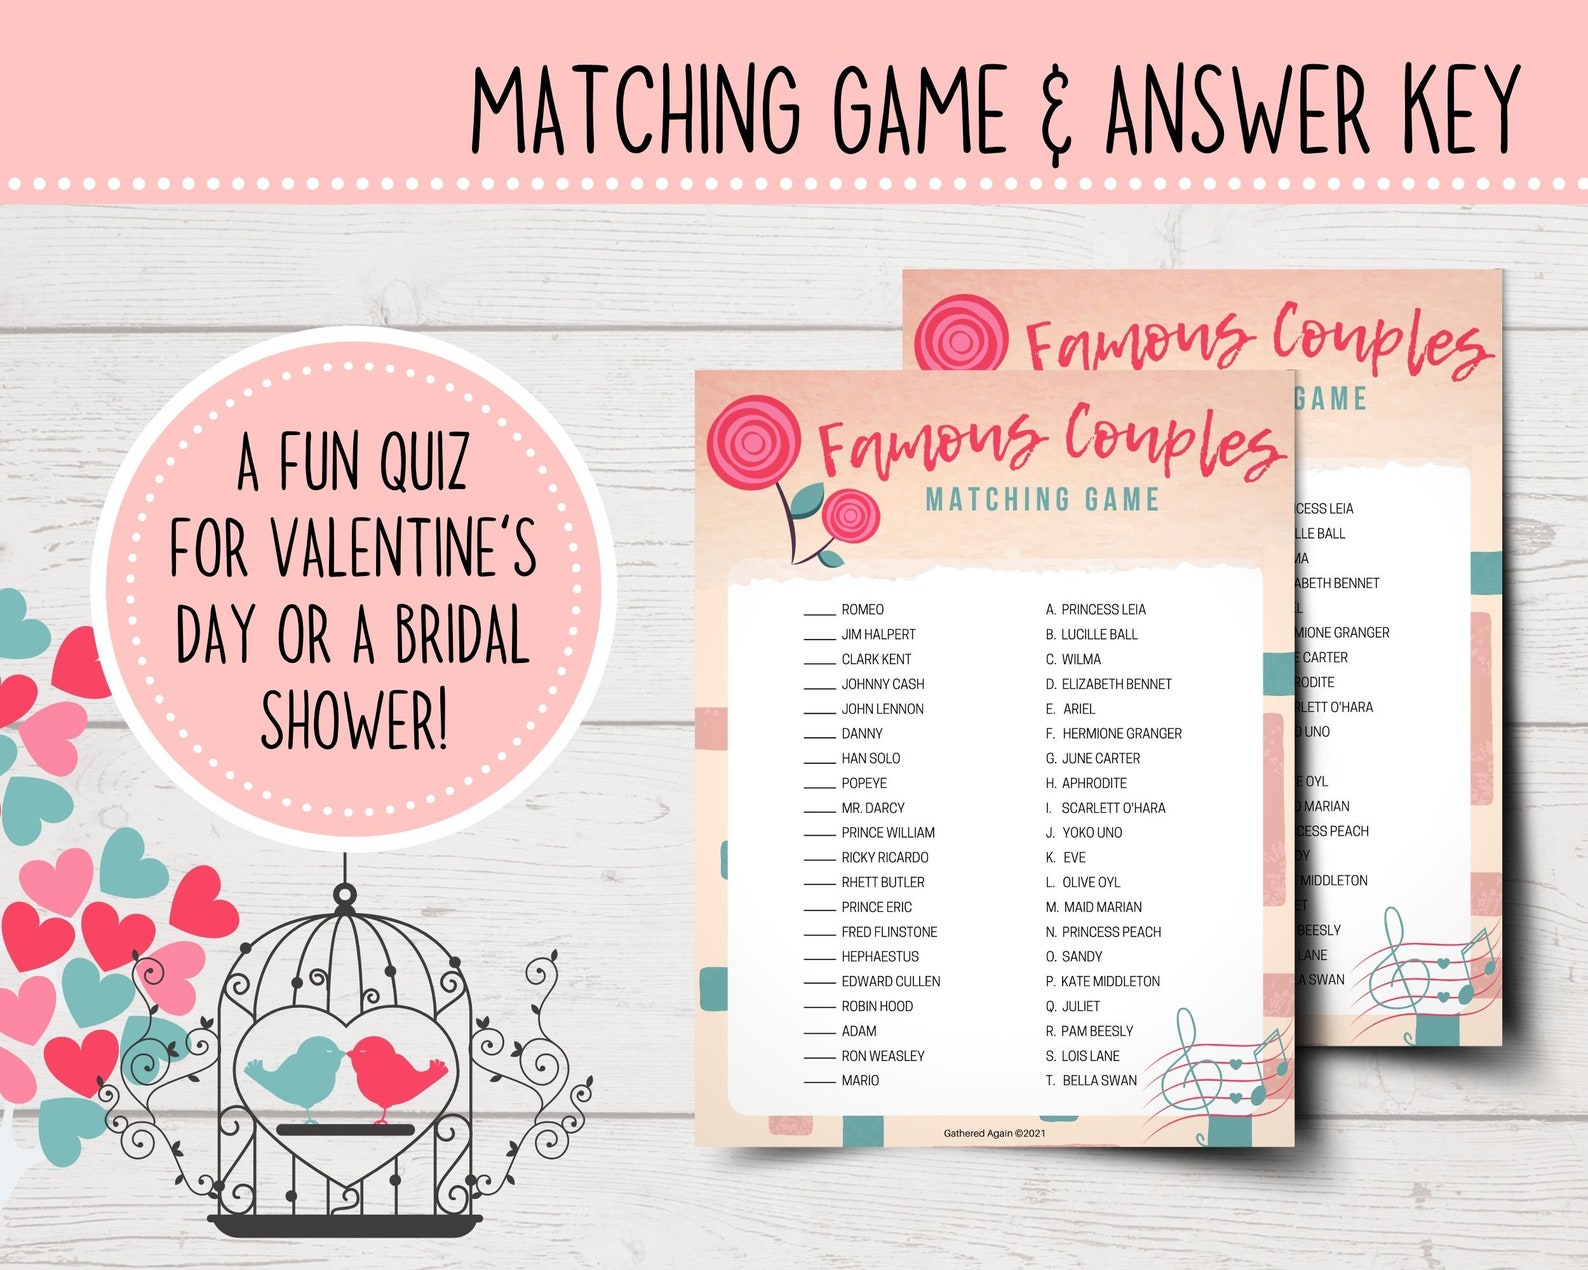 Famous Couples Matching Game Bridal Shower Game Etsy New Zealand